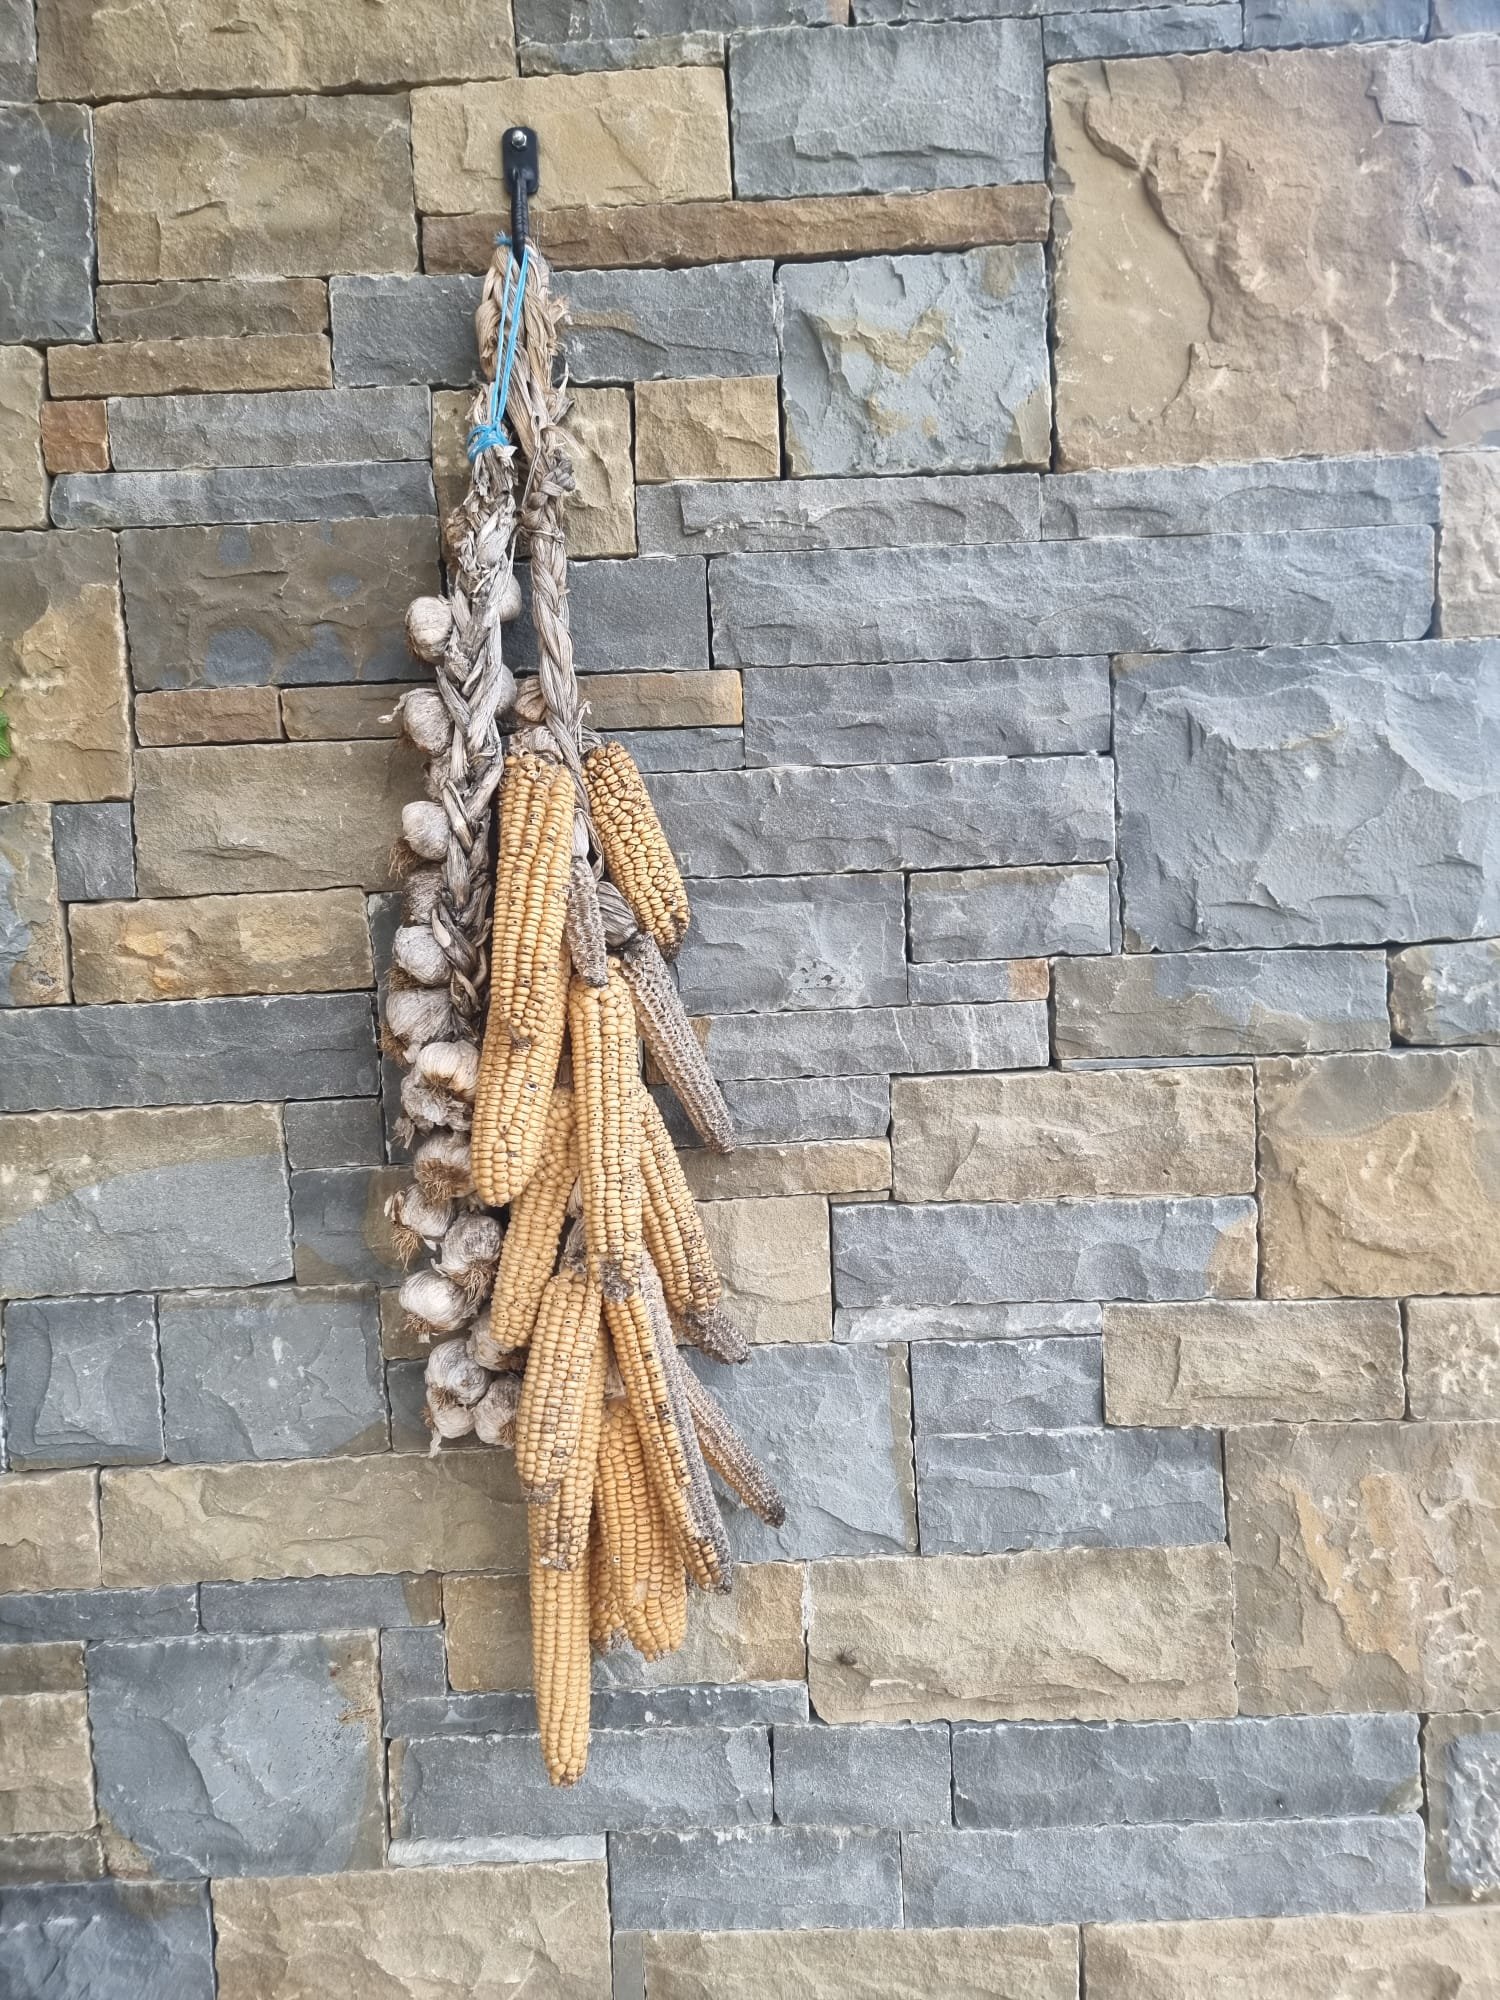 Vuglec Breg corn on the cob hanging from a stone wall.